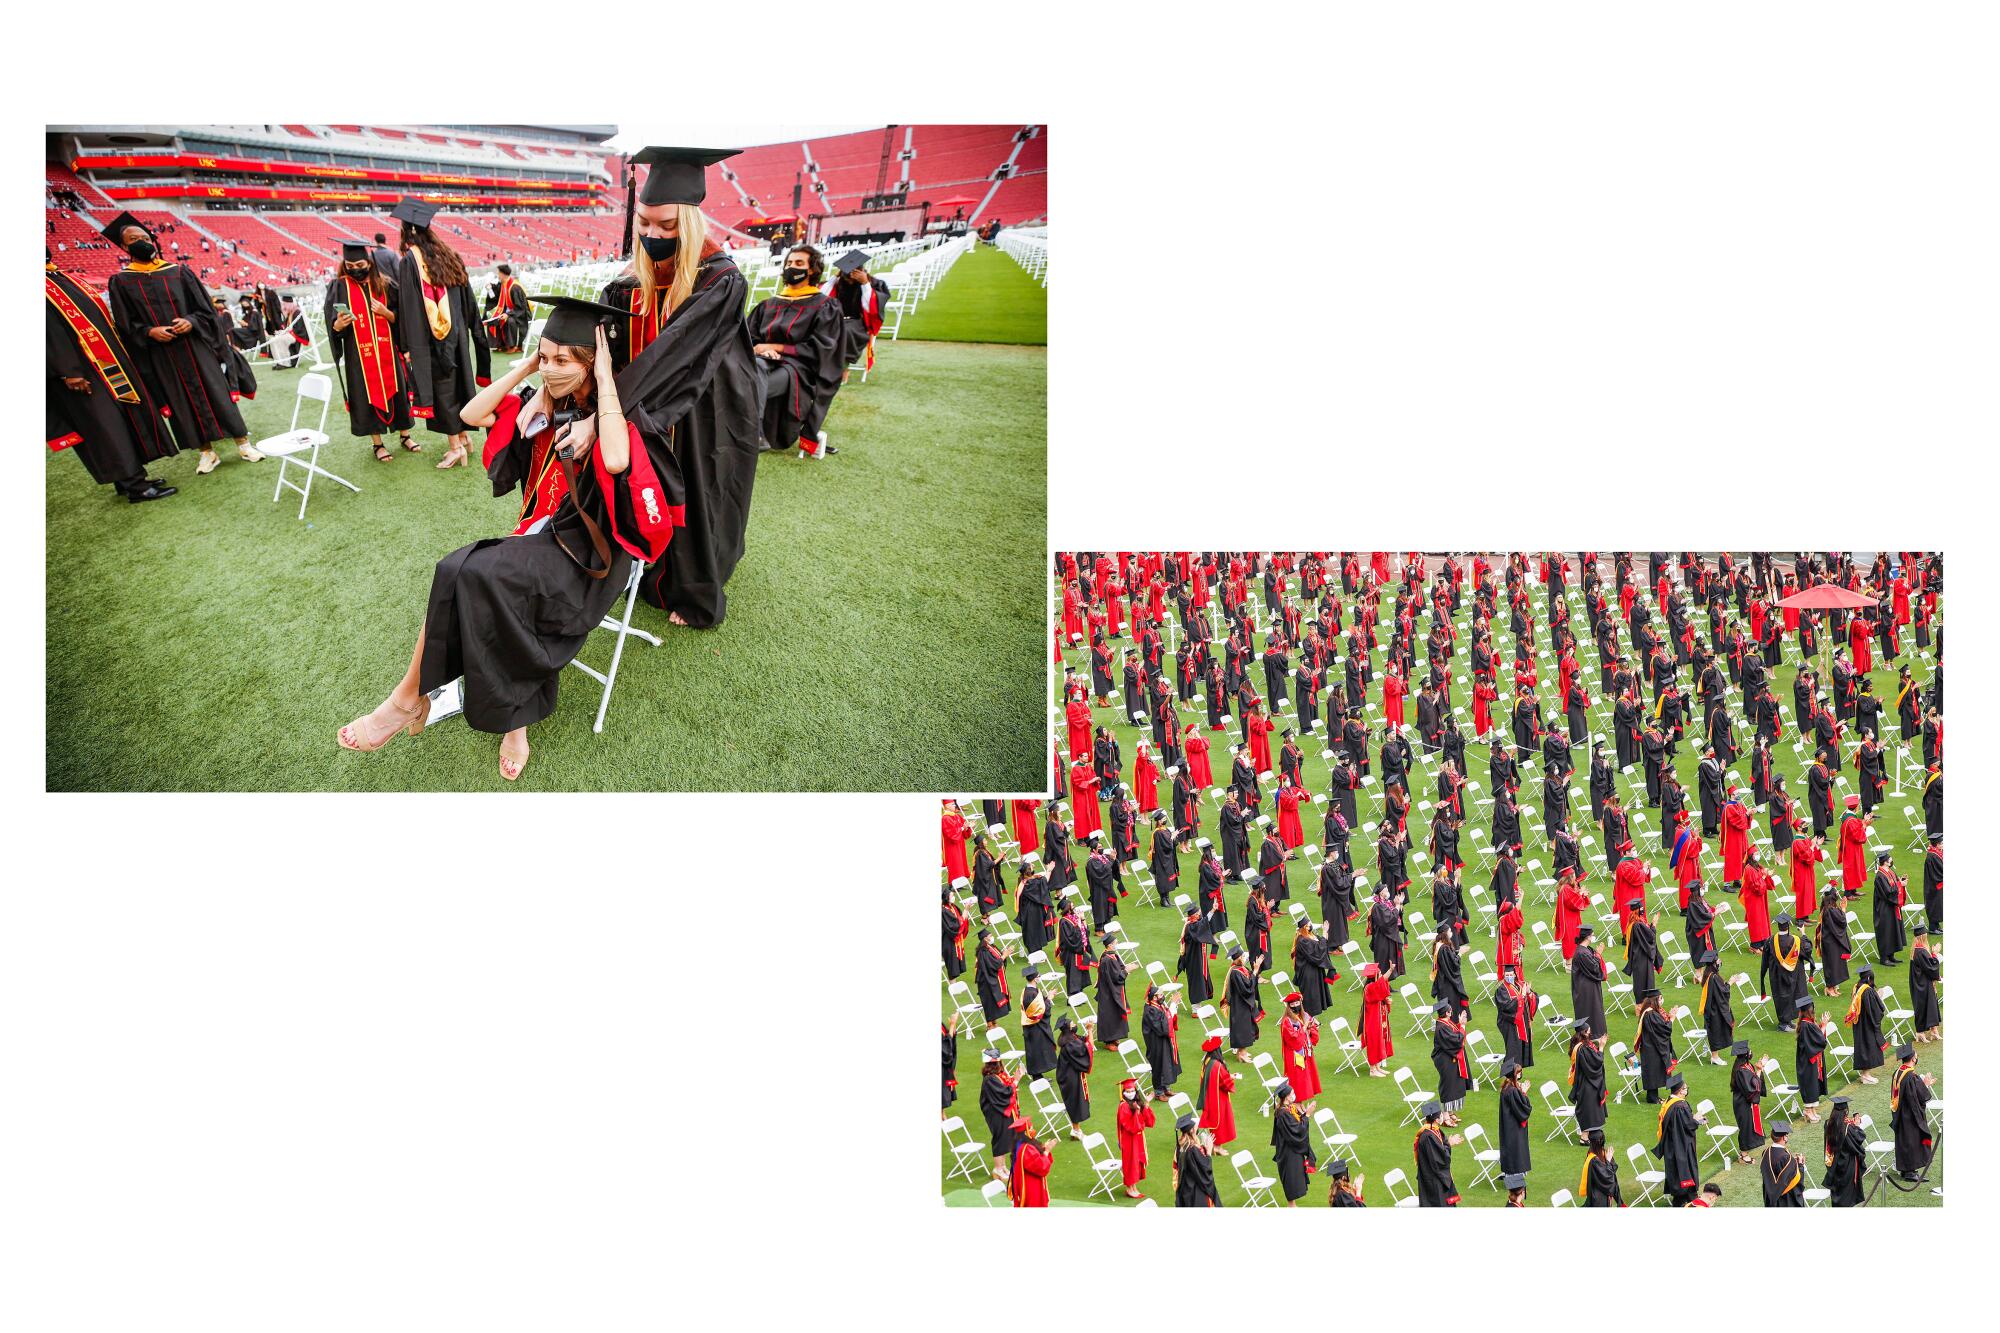 One photo shows graduates in gowns, mortar boards and face masks; another shows graduates standing six feet apart.